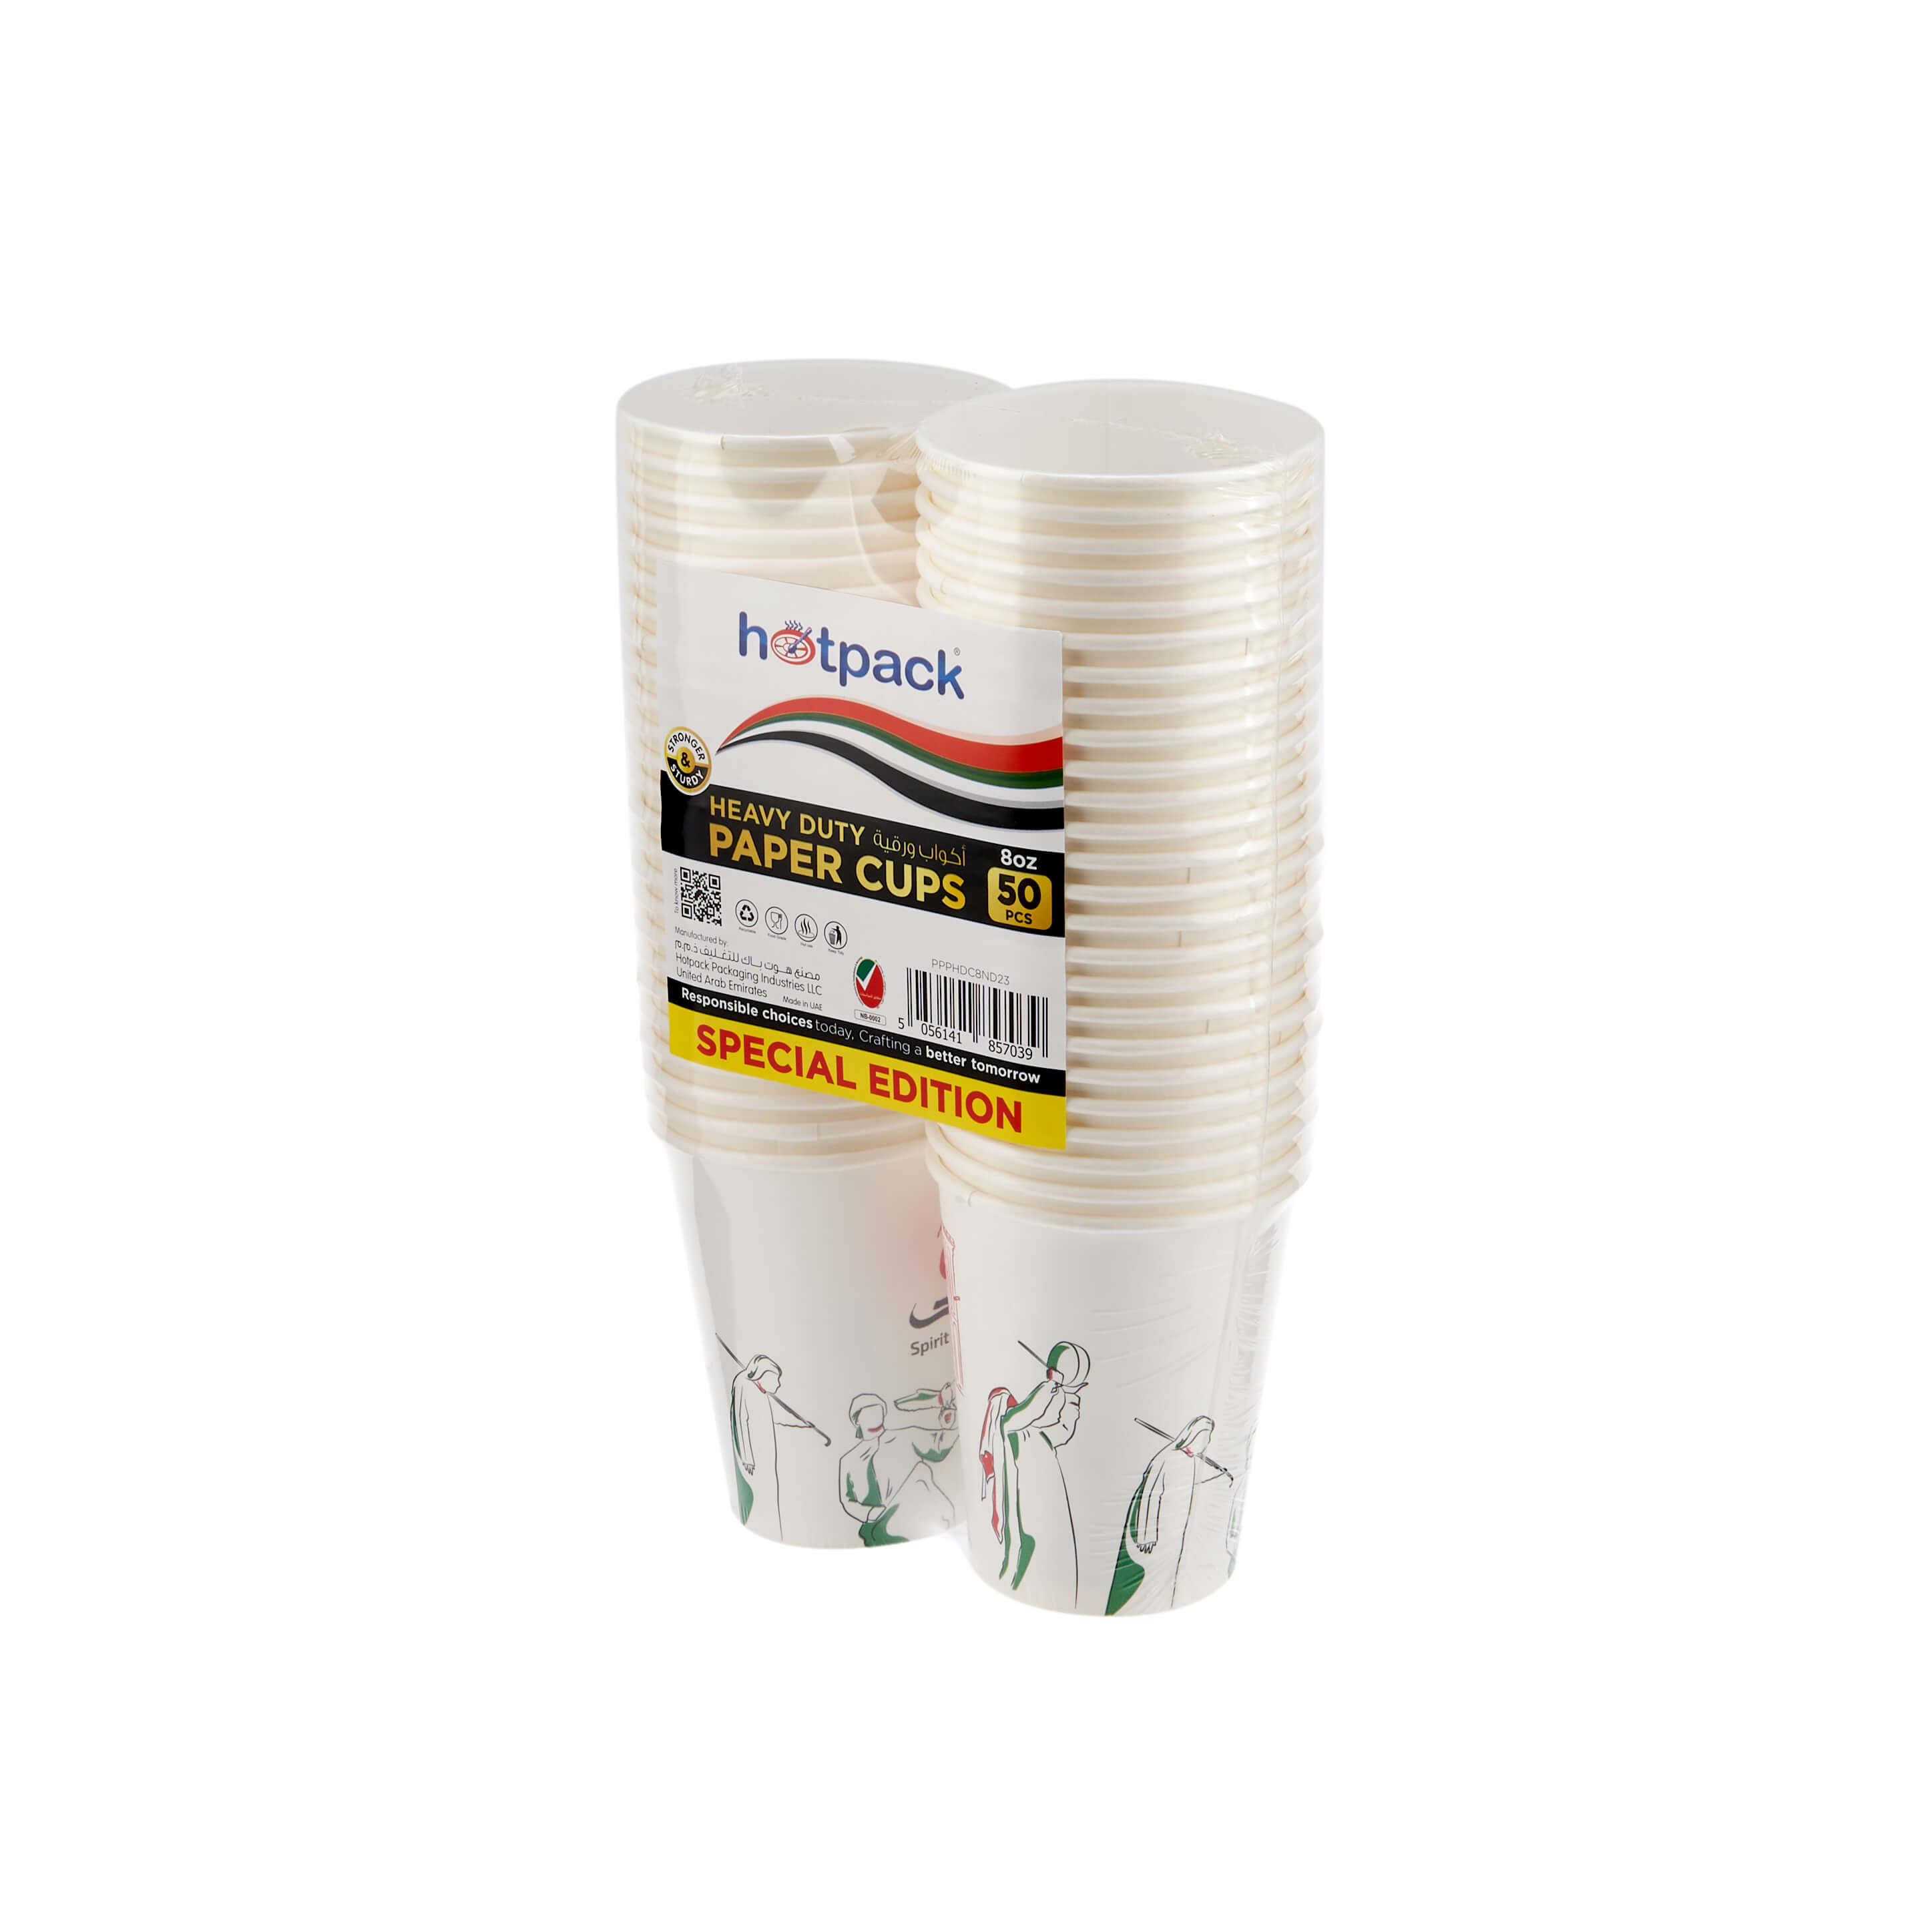 Spirit Of The Union - UAE National Day Theme Paper Cup - hotpackwebstore.com